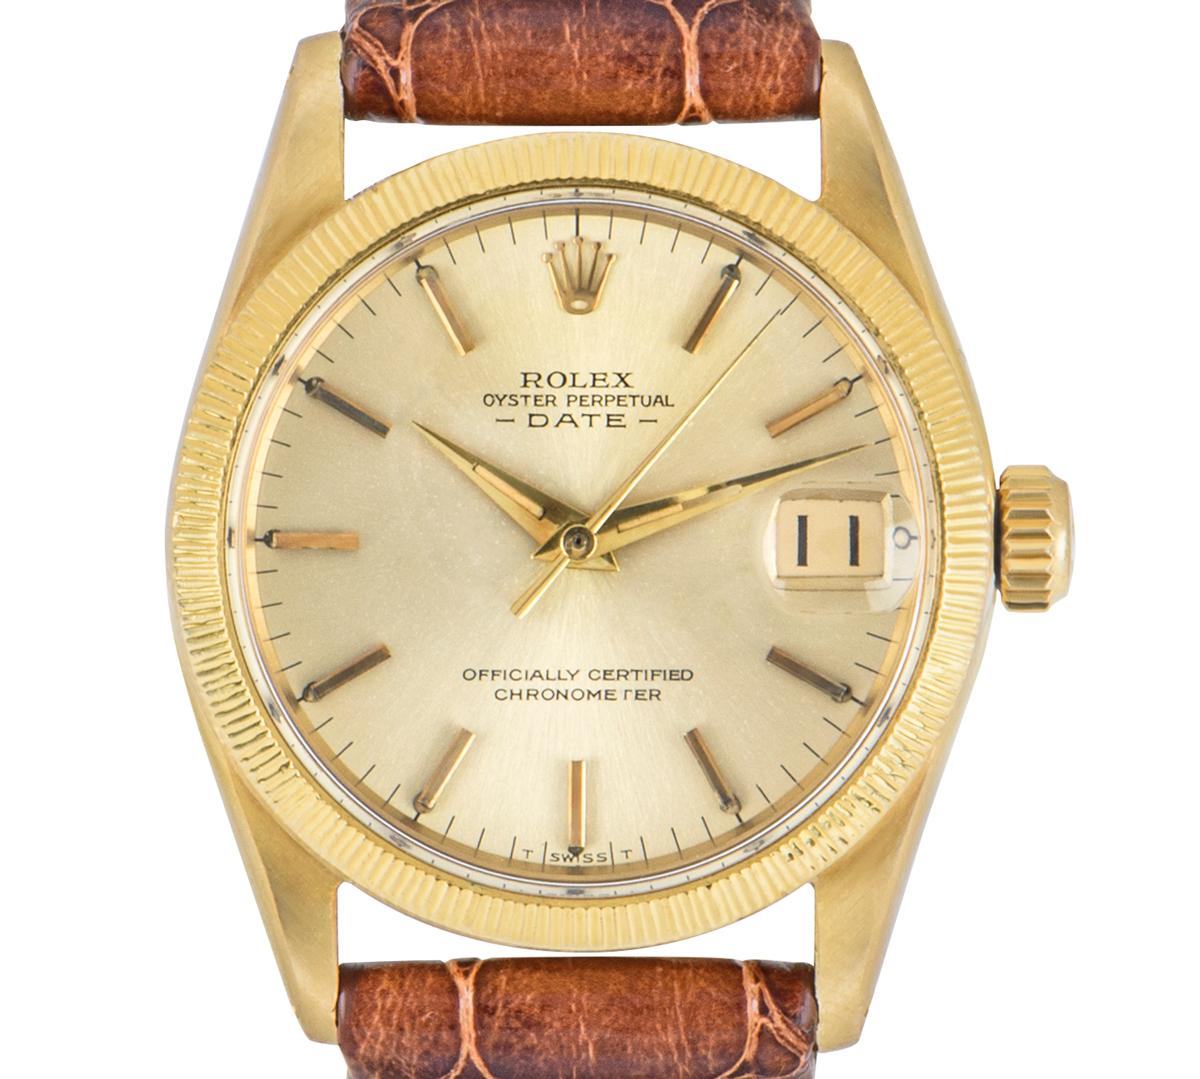 A Rolex midsize Date in yellow gold. Featuring a champagne dial with applied hour markers, a date aperture and a fixed yellow gold bezel. The watch is fitted with a plastic glass, a self-winding automatic movement and is presented on a generic brown